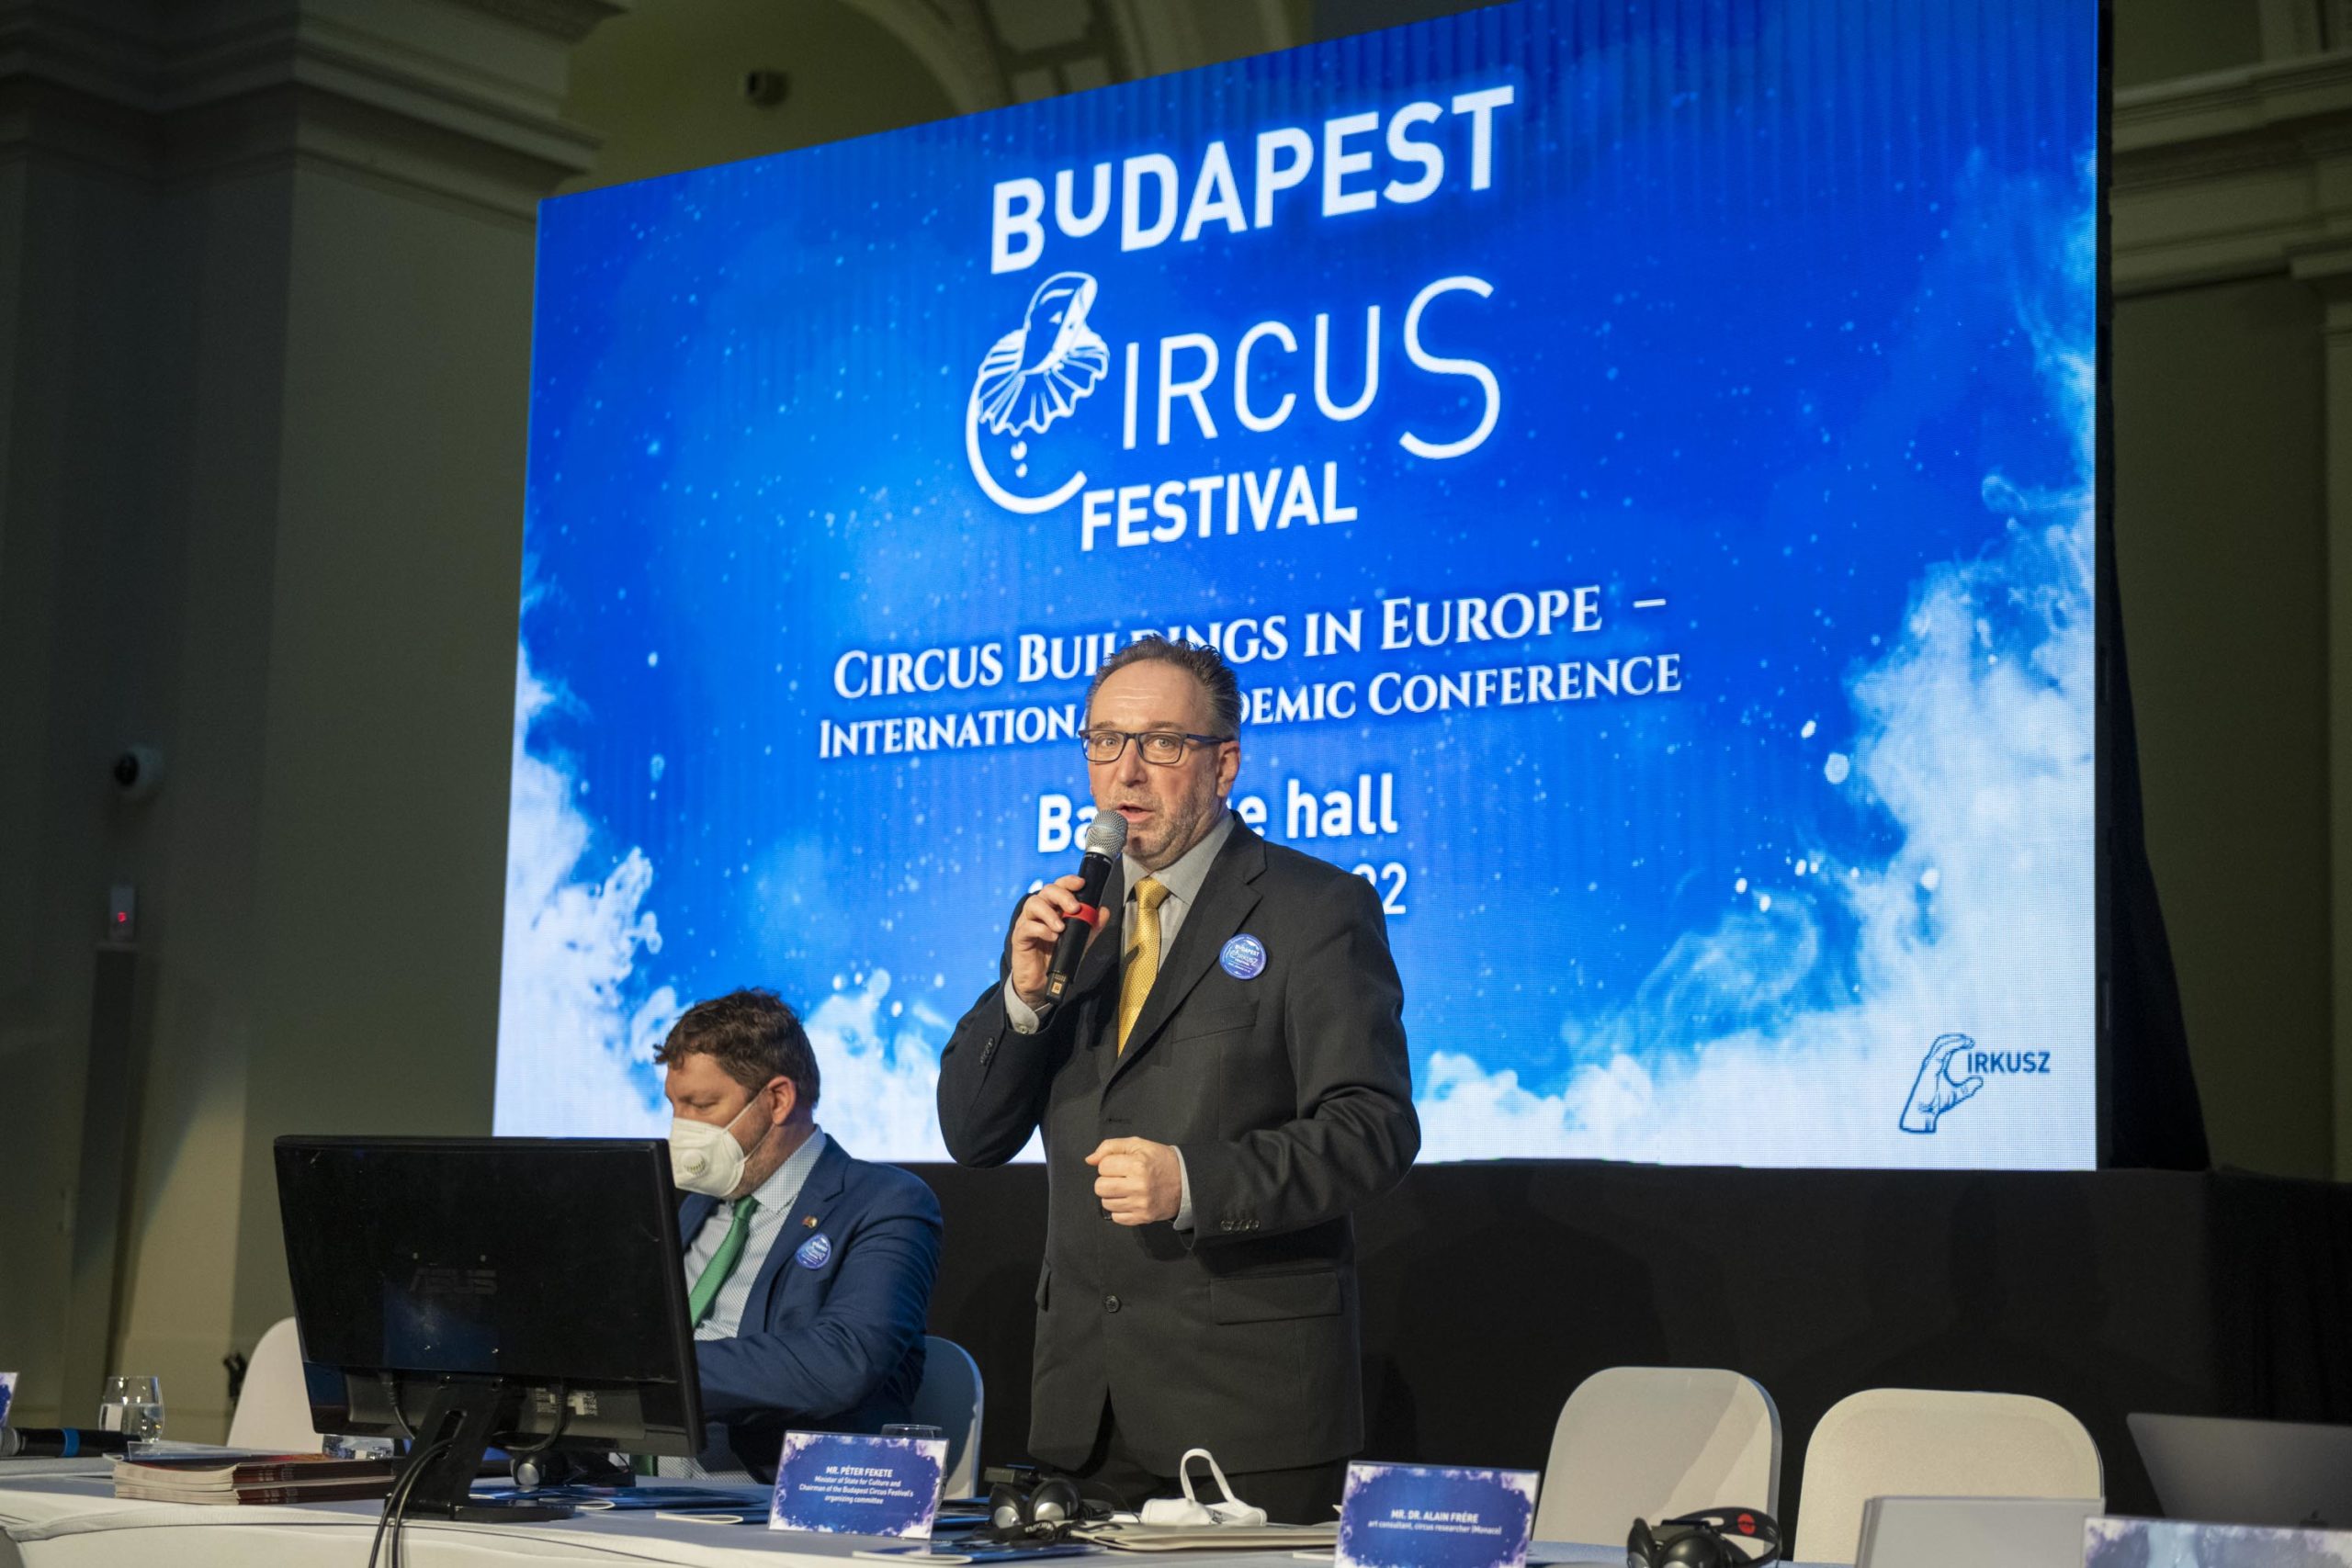 Peter Fekete, equipped with suit and microphone, opens the Circus Buildings in Europe Conference and Exhibition